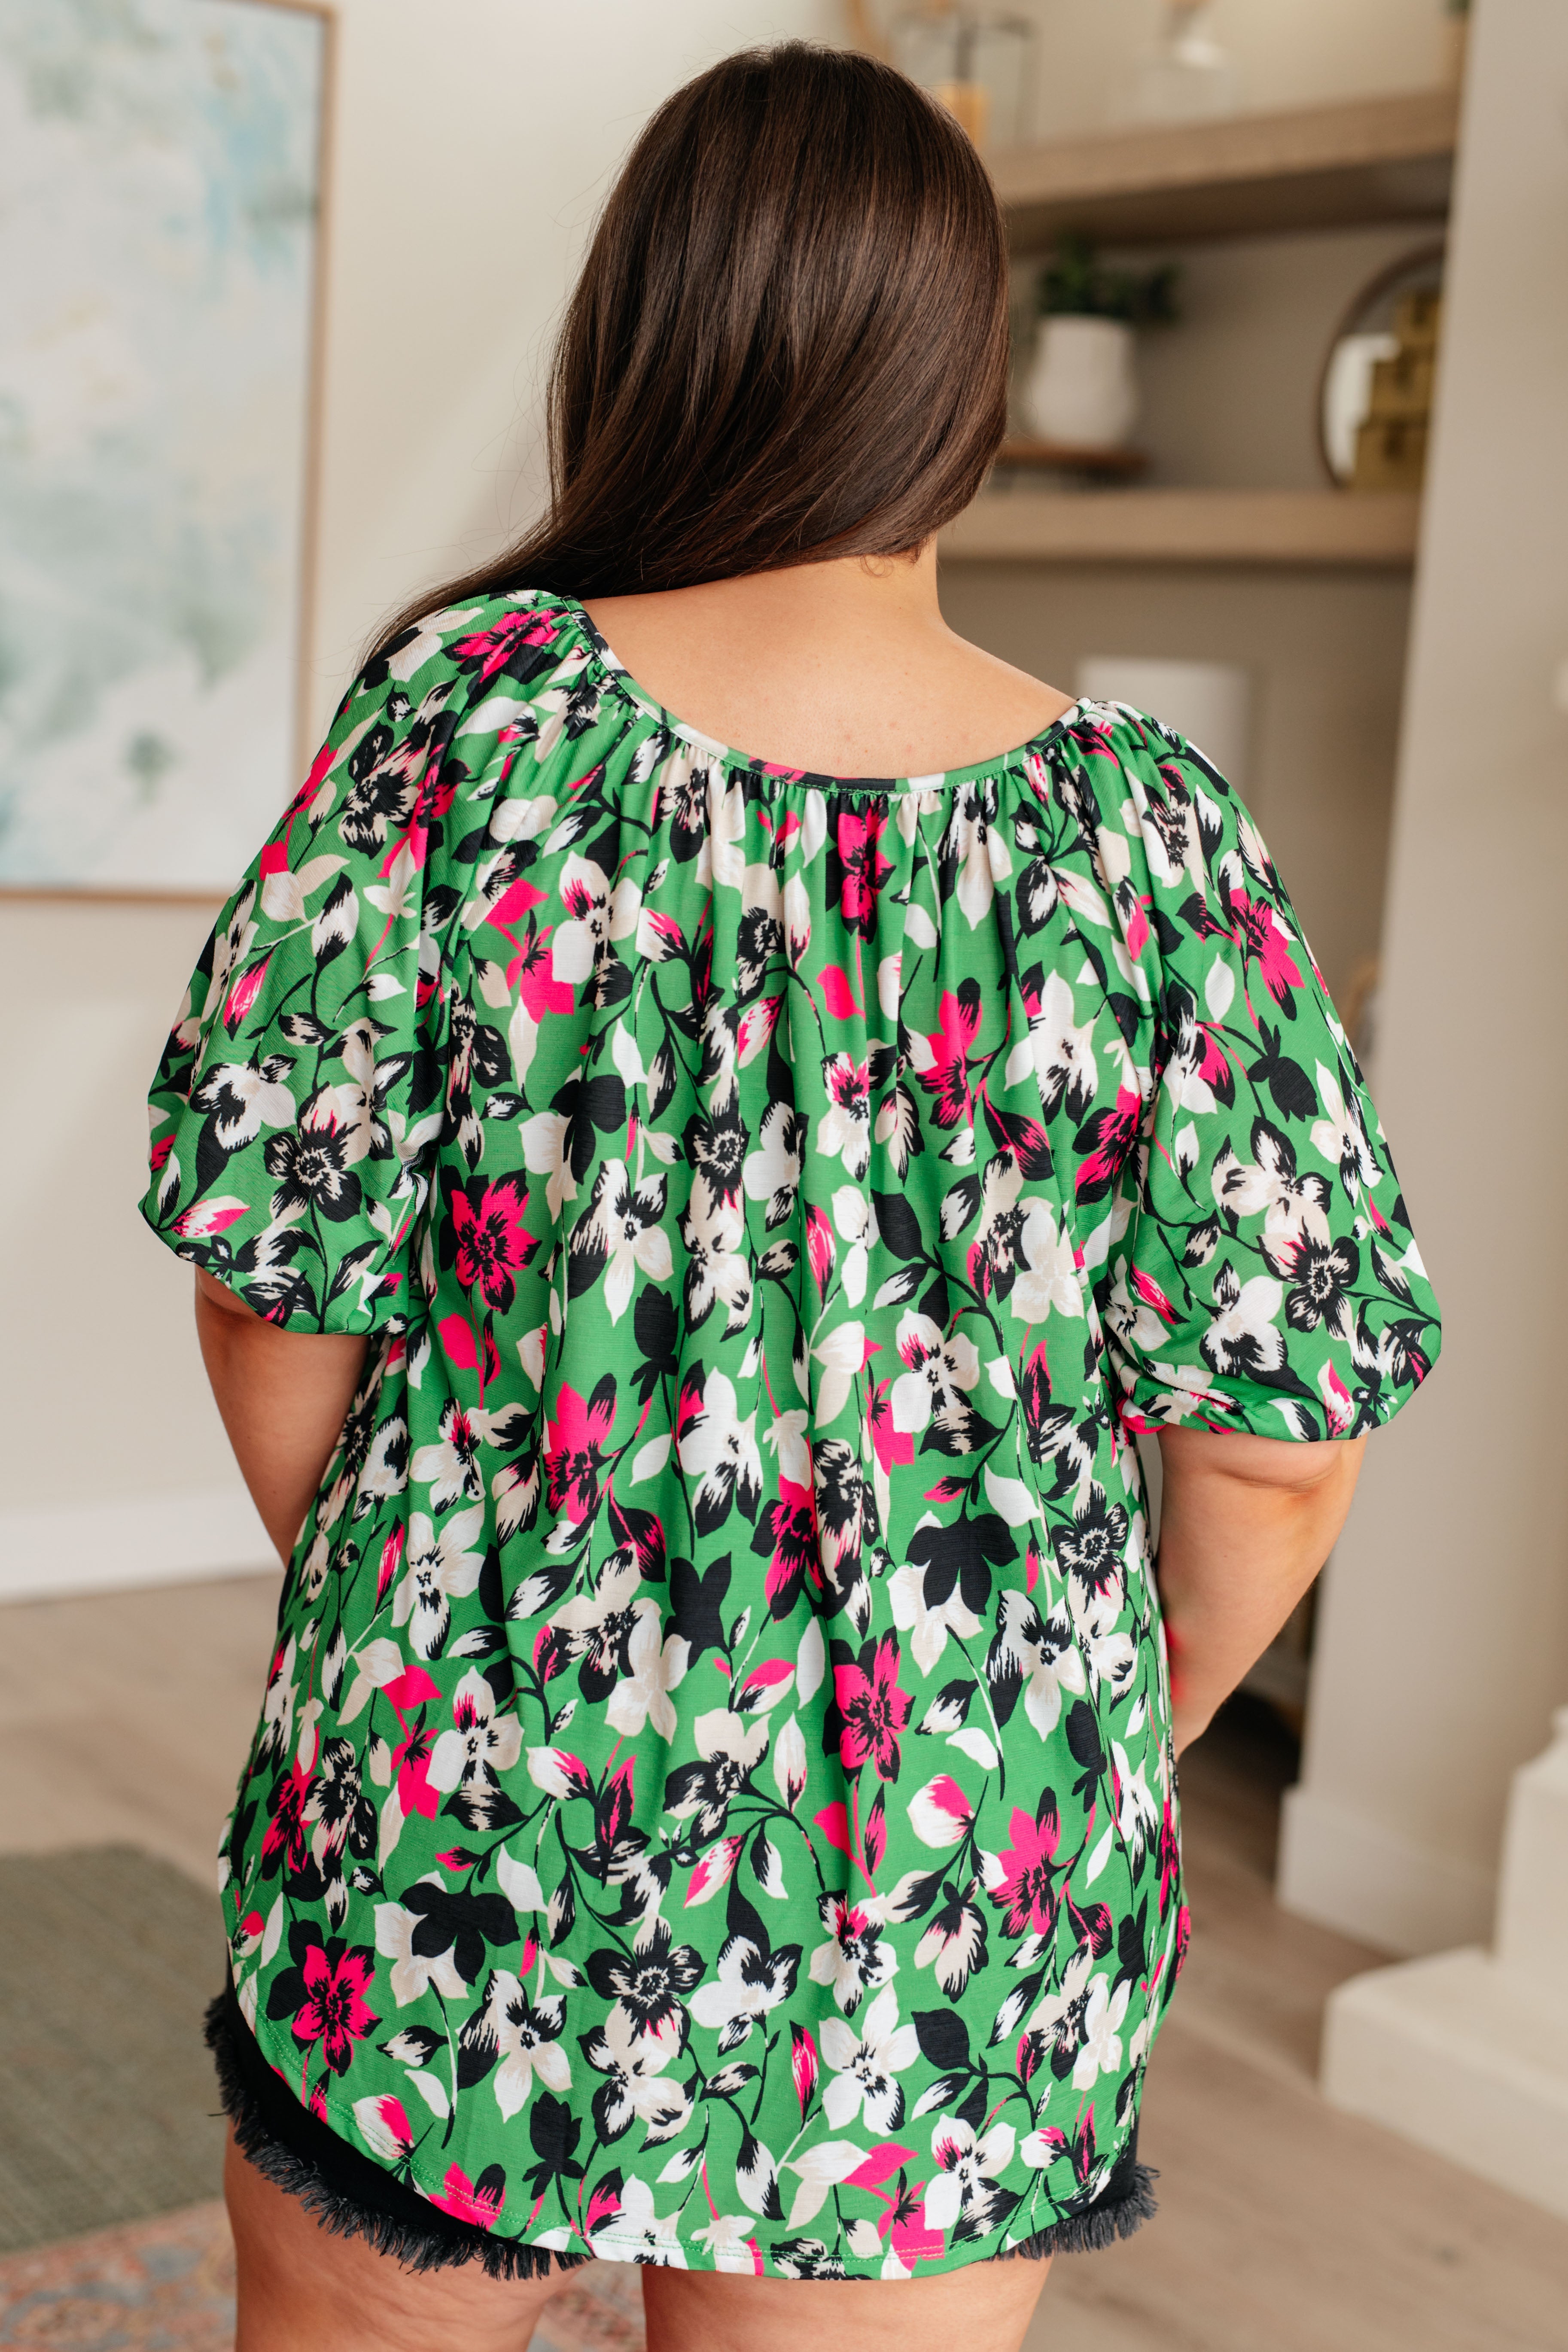 Wild and Bright Floral Top Ave Shops